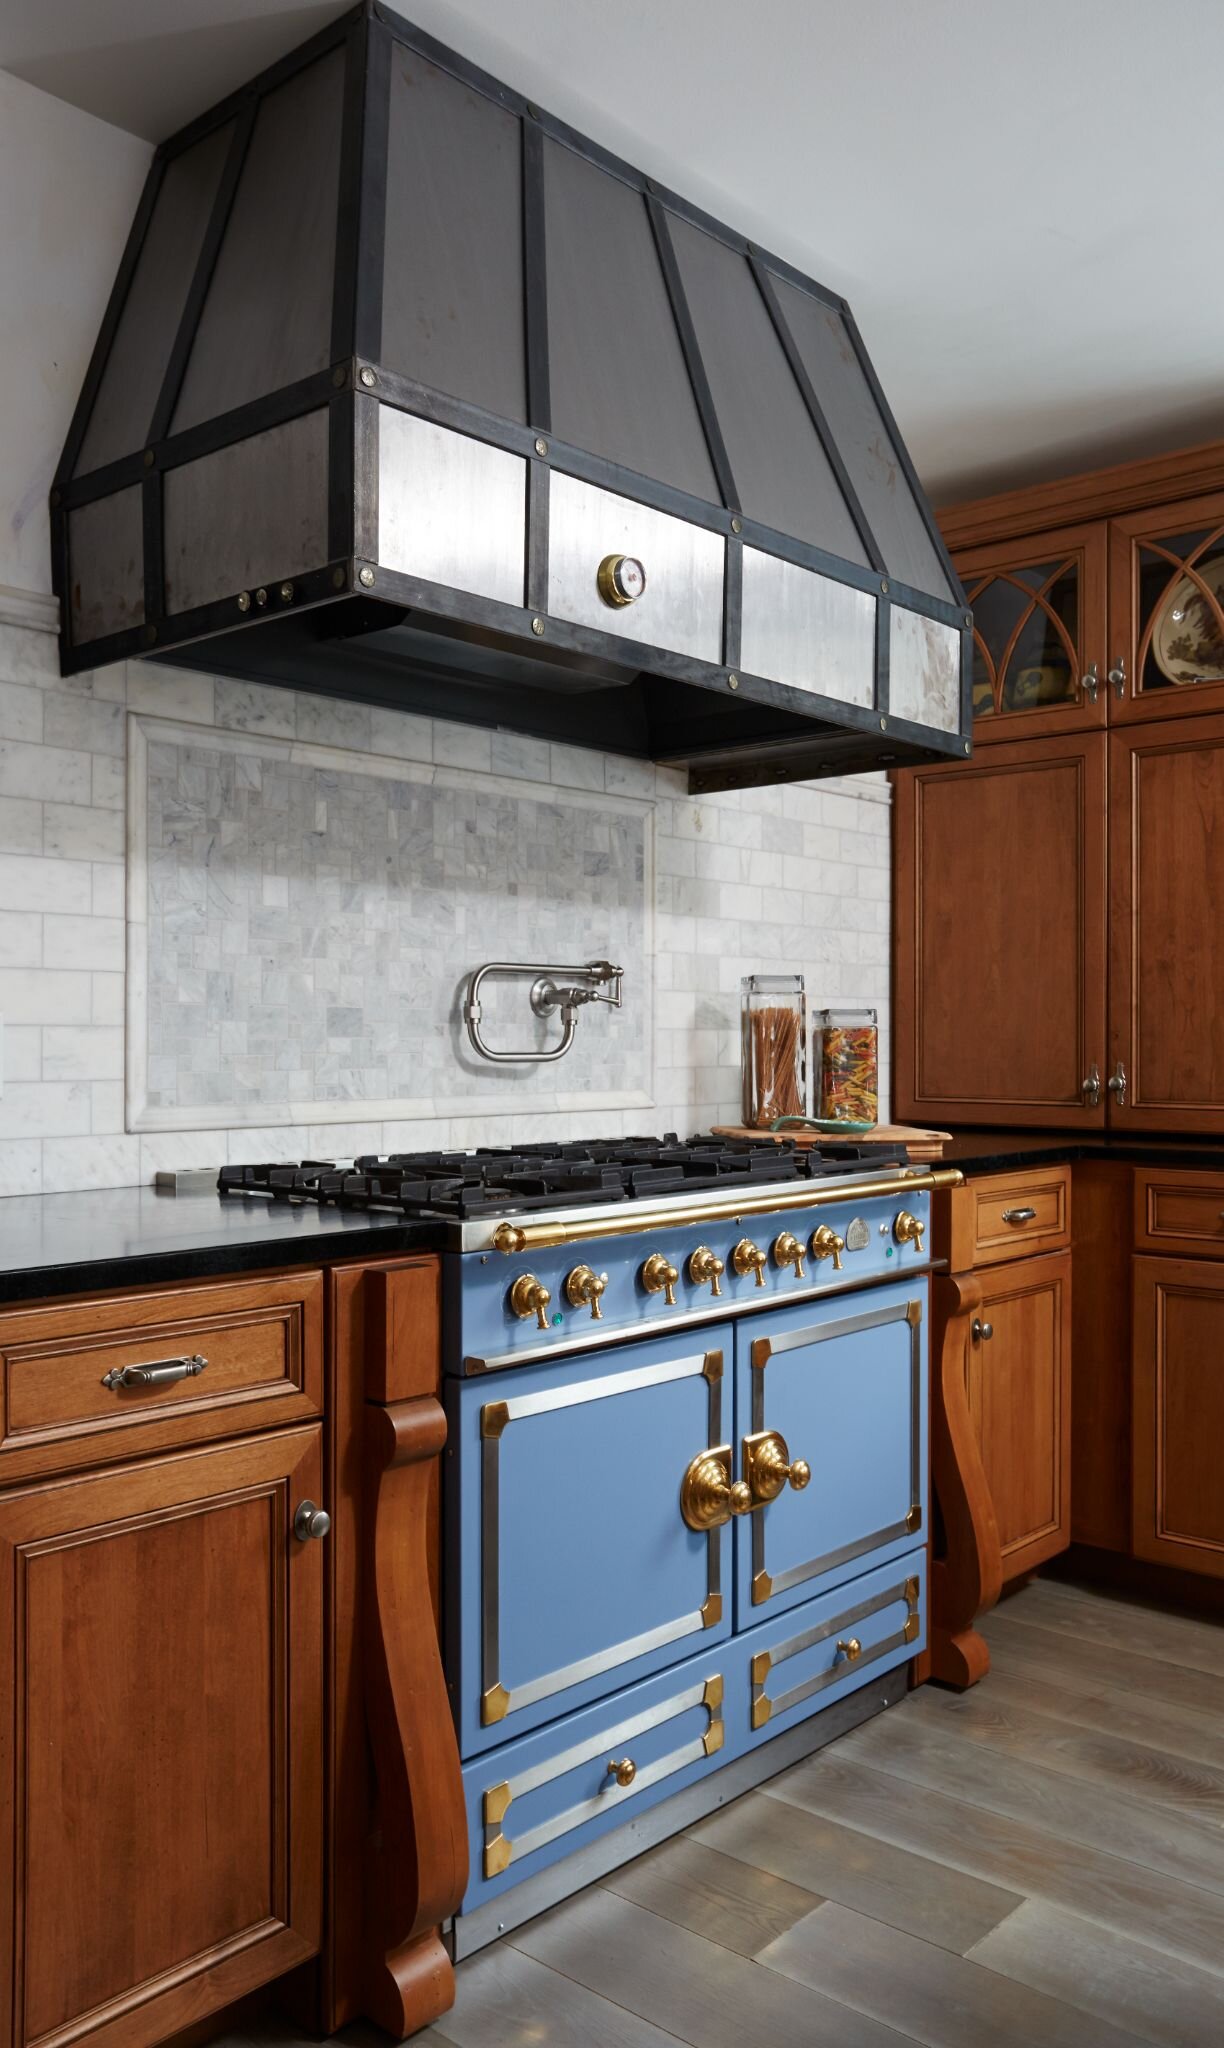 We are giving this kitchen a chef&rsquo;s kiss! 

Call us today or visit our website to learn more about our process and services! 
https://www.julianinc.com/services / (952) 937-0589
@lacornueusa 

#juliandesign #shapingtheartofliving #interiordesig